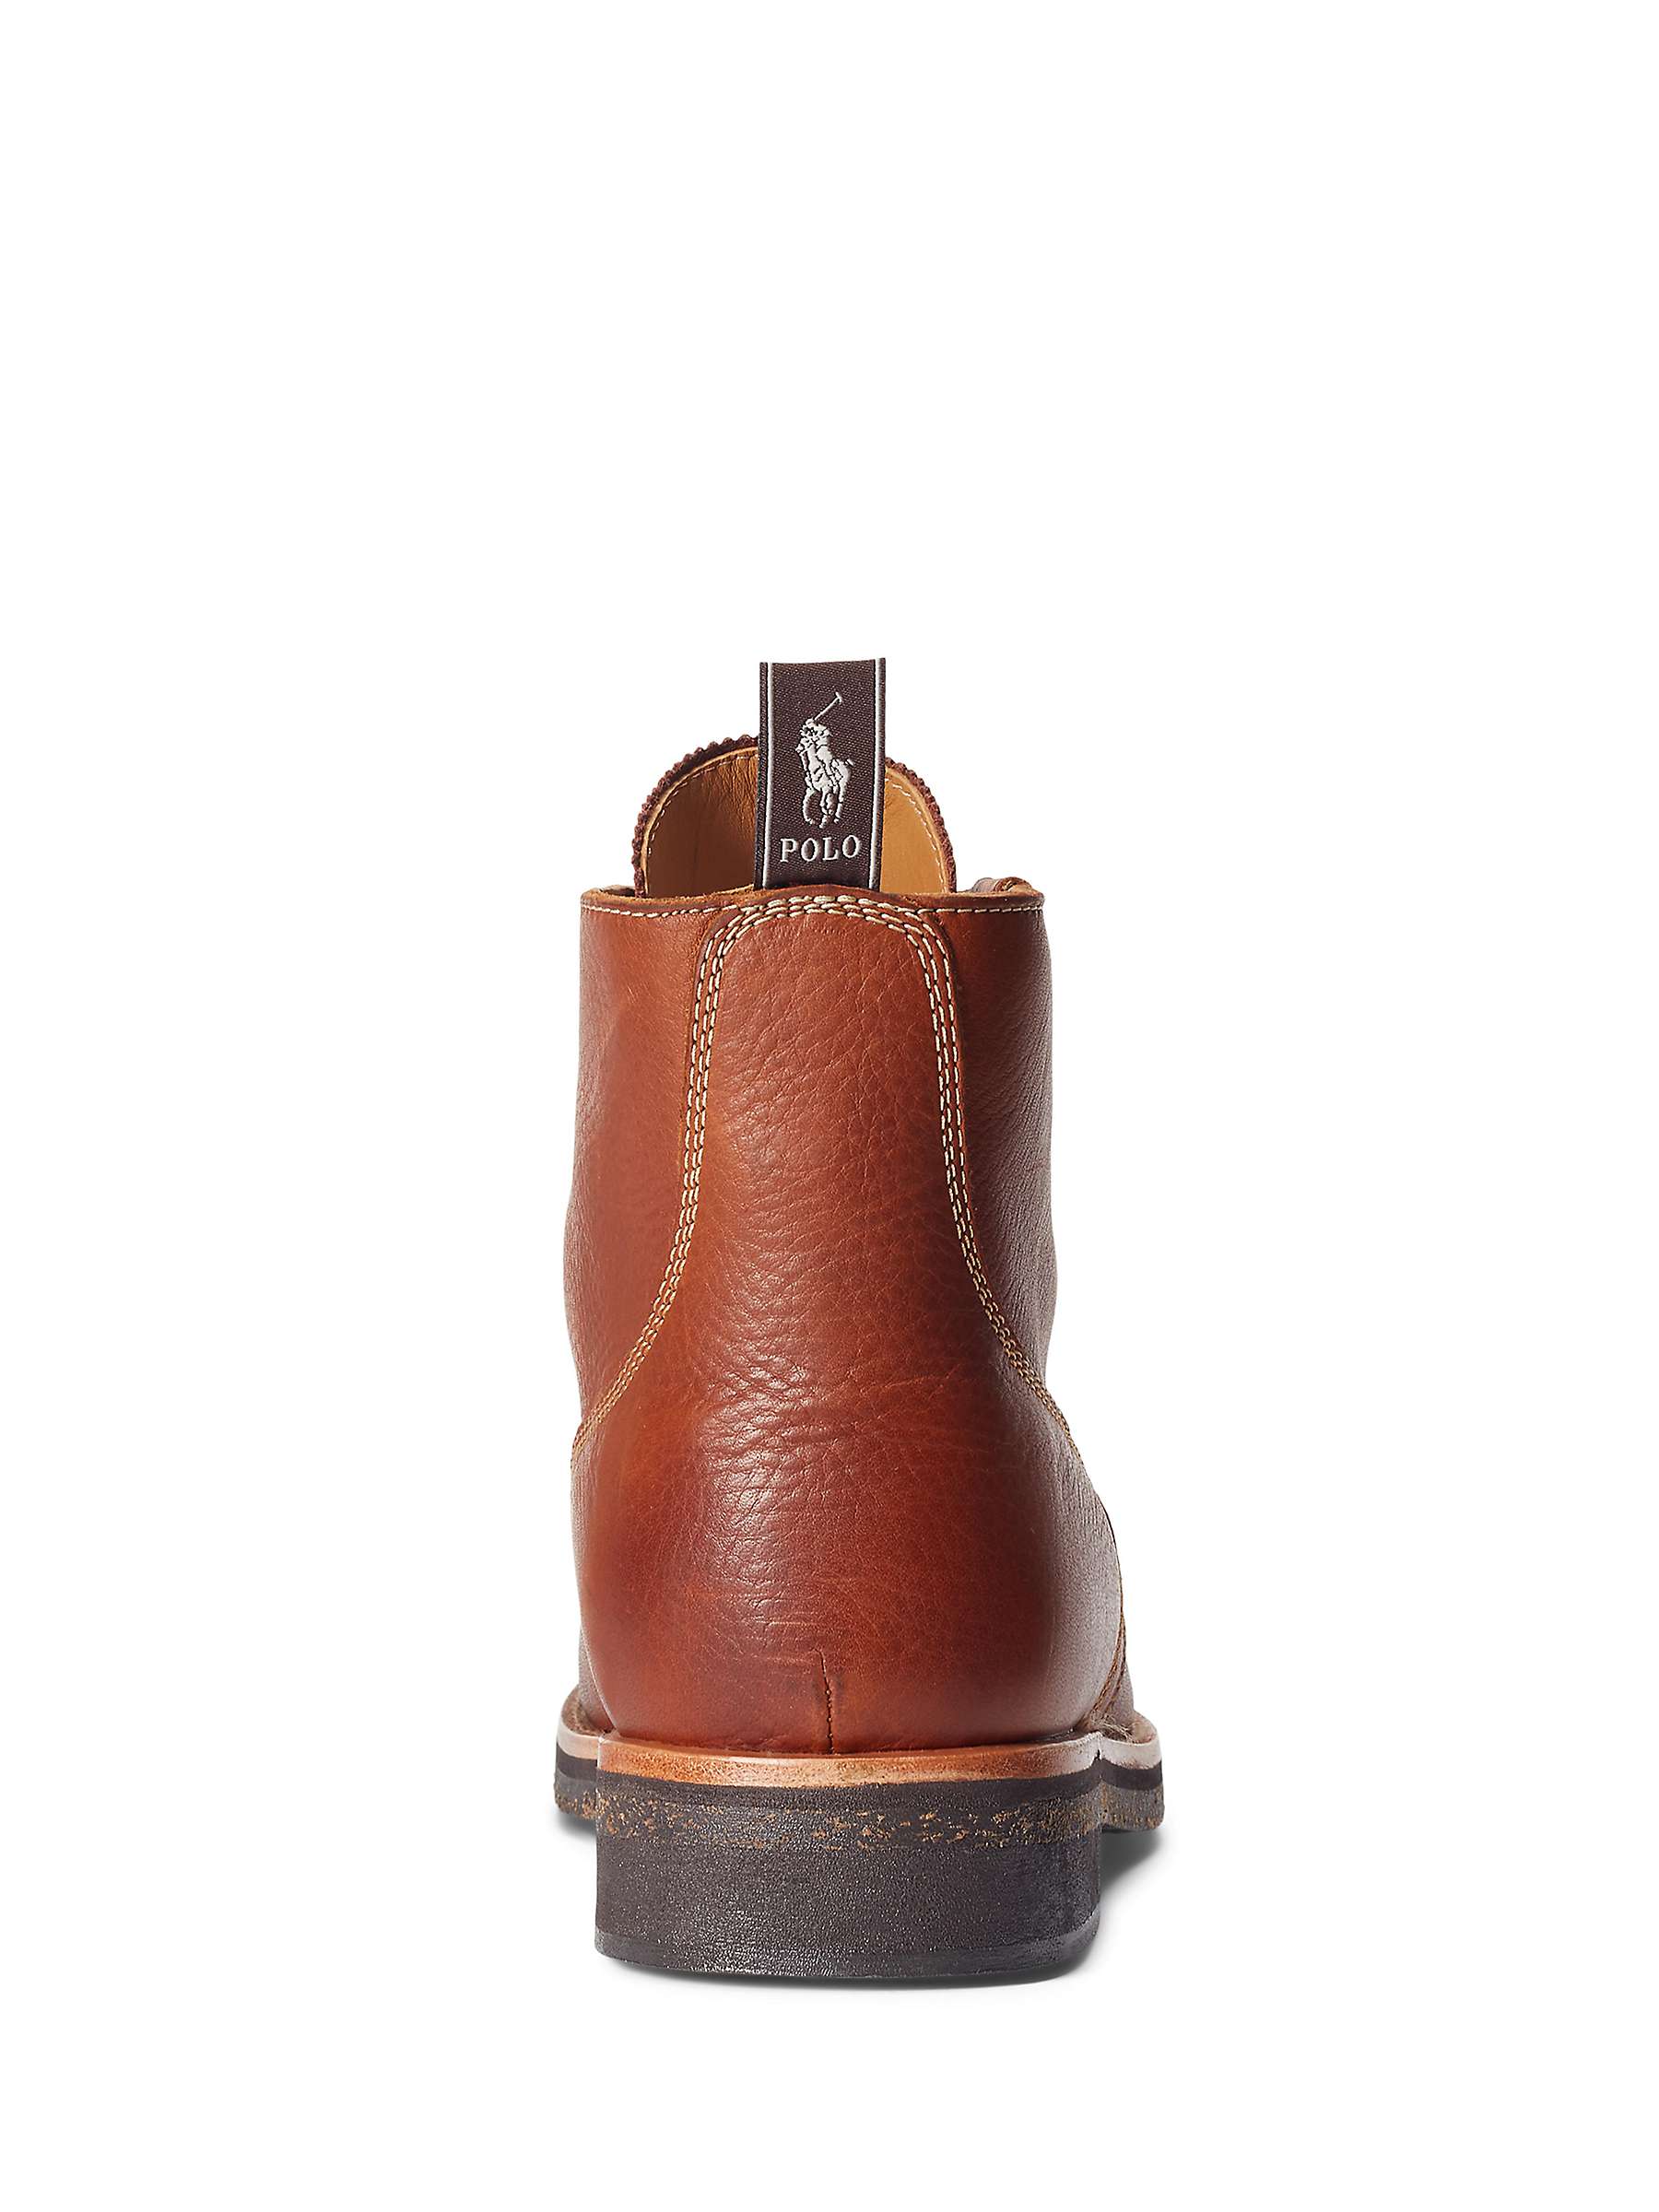 Buy Ralph Lauren Tumbled Leather Boots, Brown Online at johnlewis.com